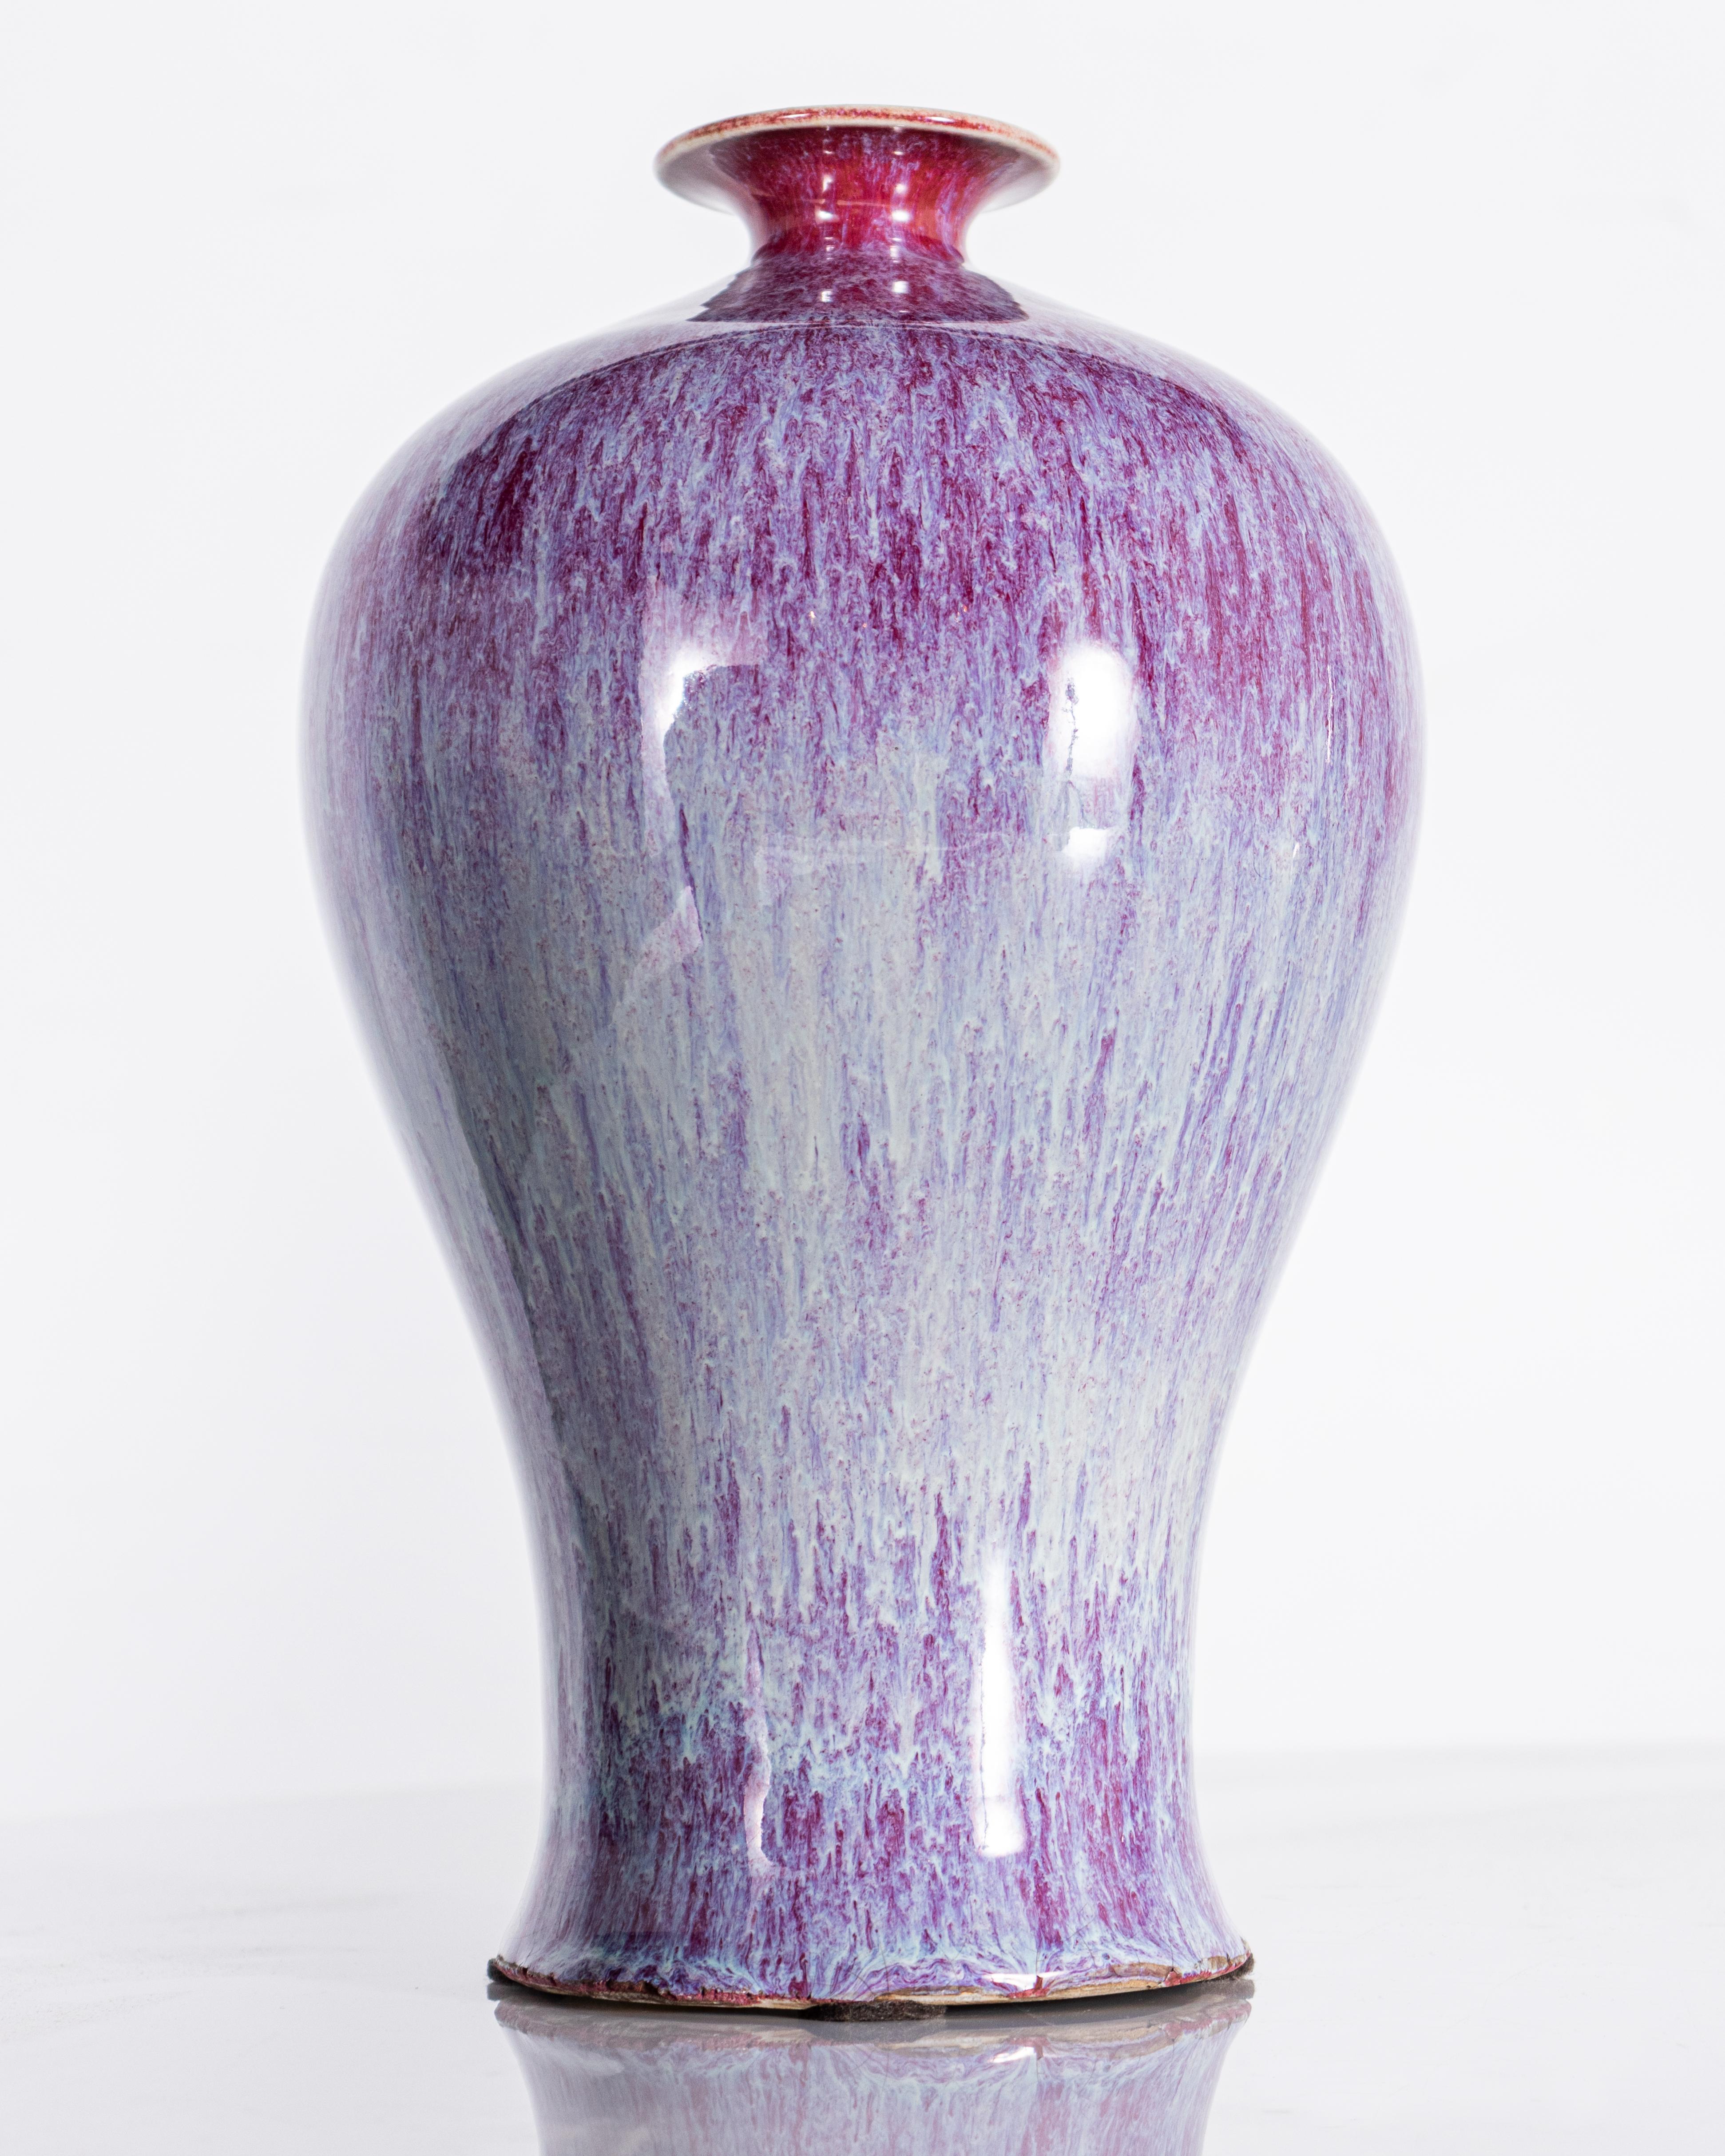 Variegated oxblood glaze Chinese vase. In my organic, contemporary, vintage and mid-century modern style.

This piece is a part of Brendan Bass’s one-of-a-kind collection, Le Monde. French for “The World”, the Le Monde collection is made up of rare